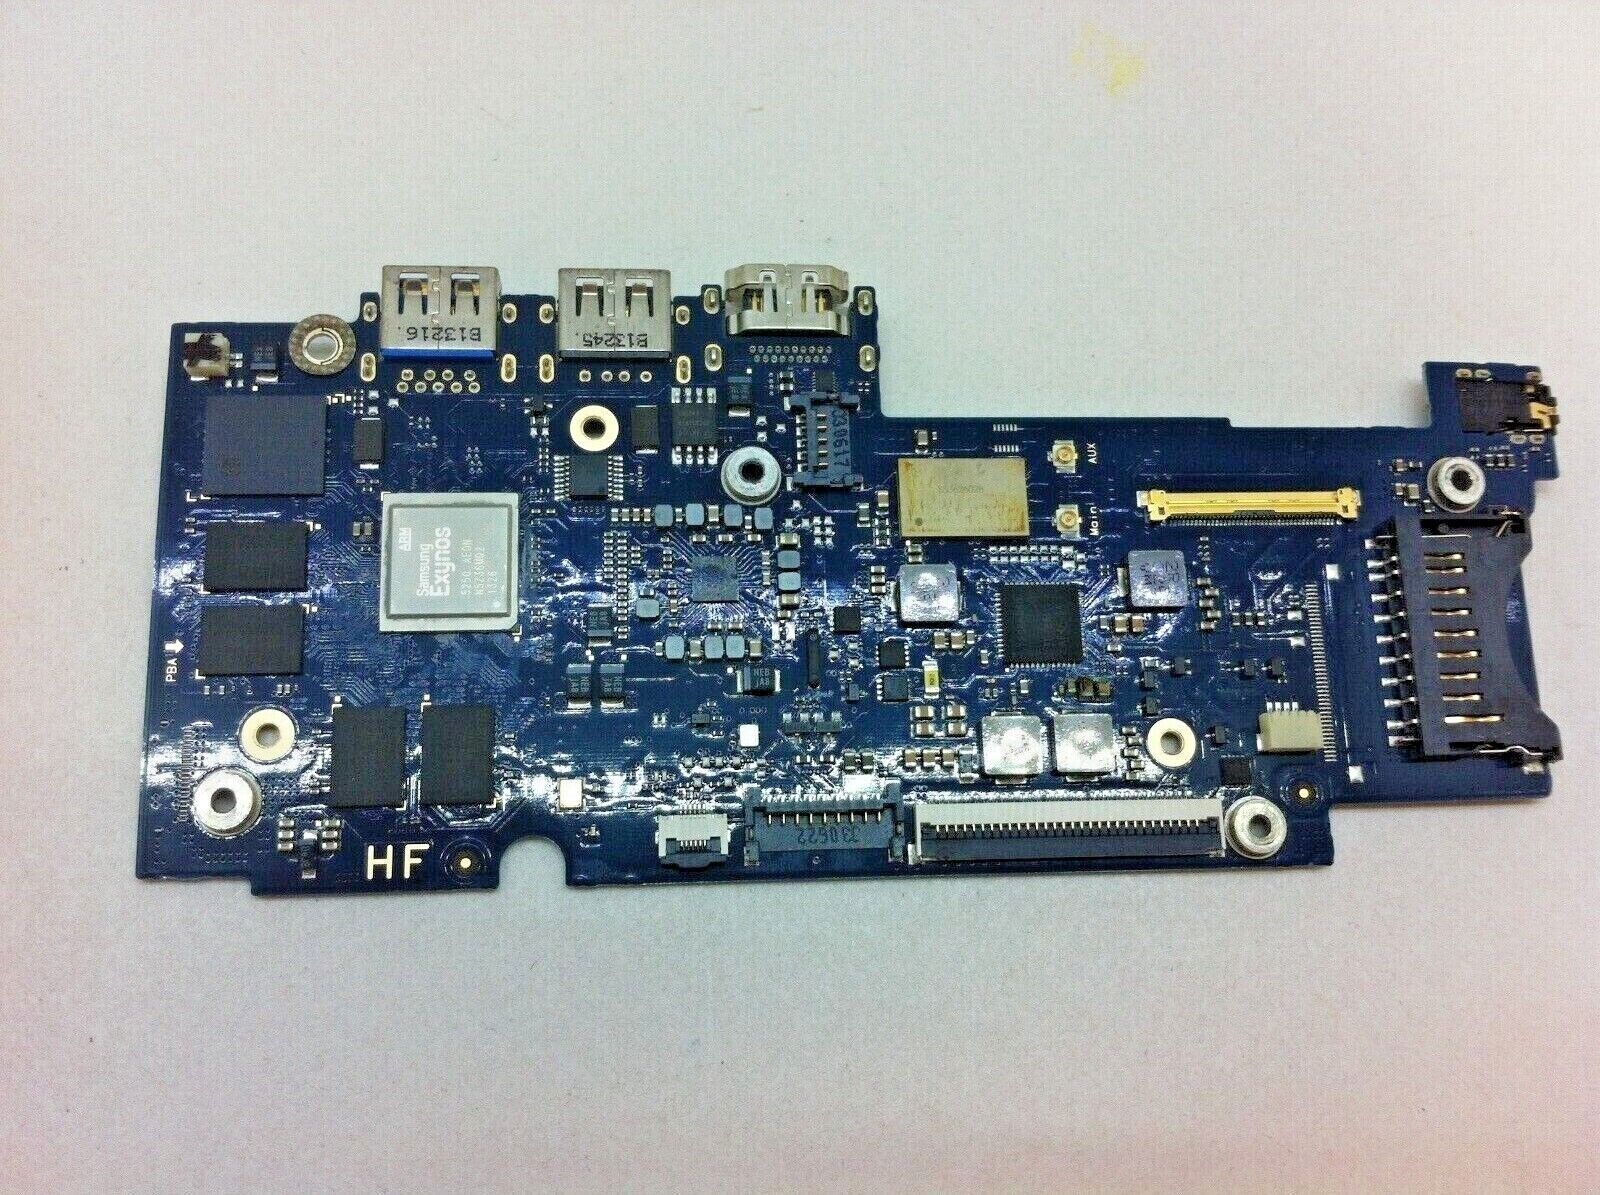 Samsung Chromebook XE303C12-A01US Motherboard BA92-14280A UNLOCKED, WORKS GREAT